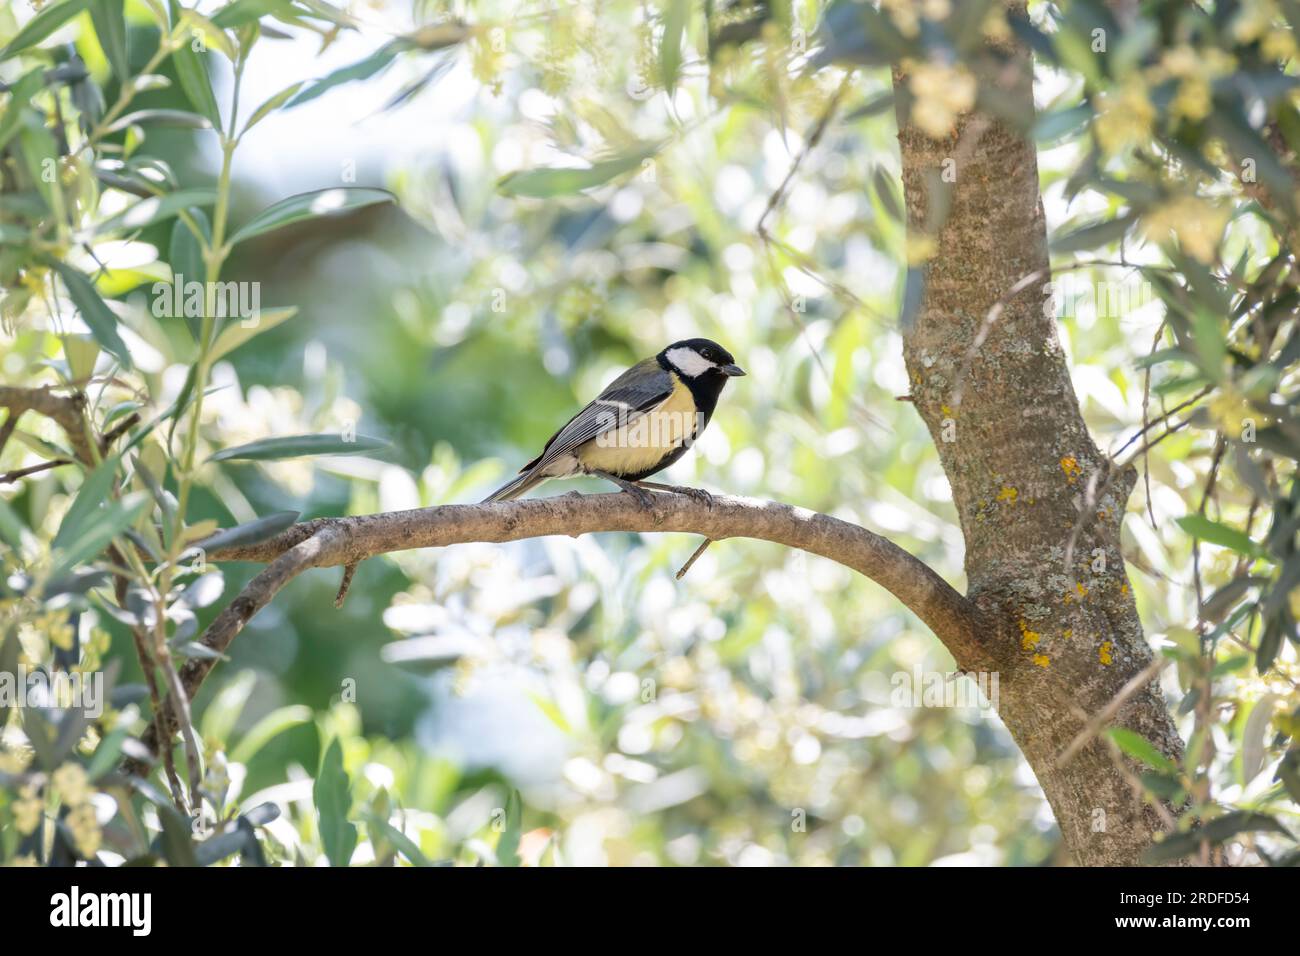 A vibrant Great Tit bird perches on an olive tree branch in Provence, south of France Stock Photo